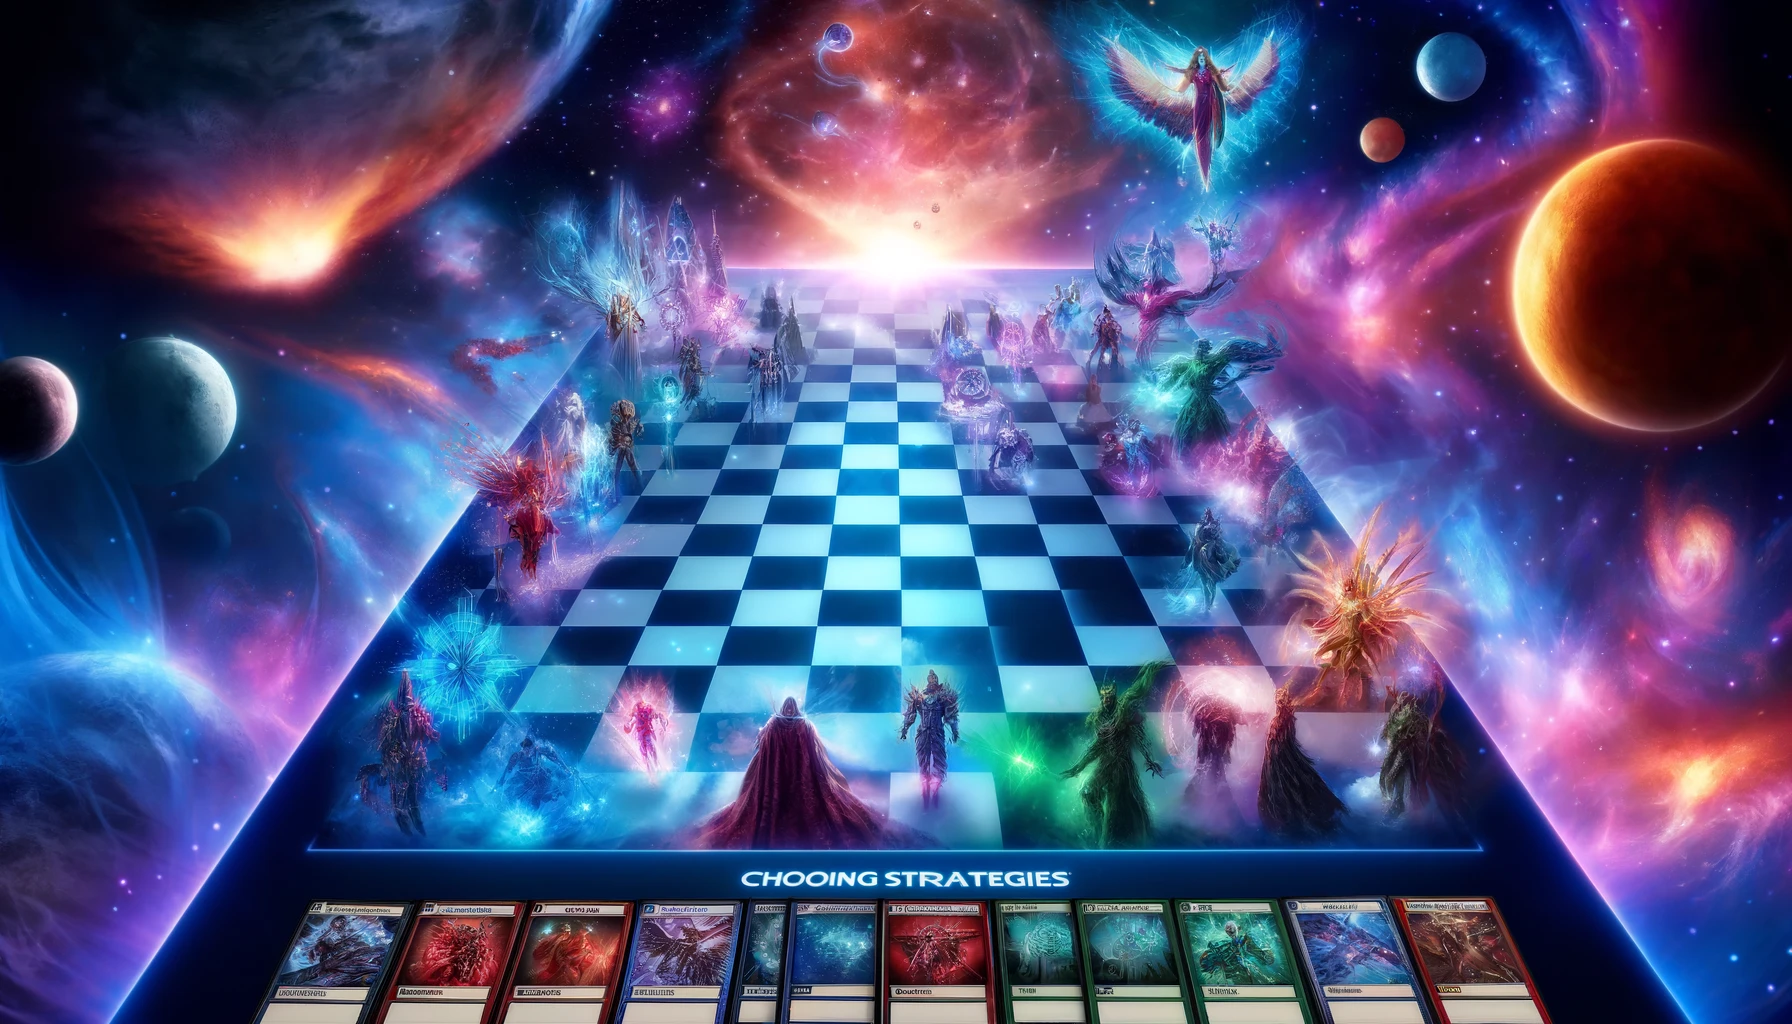 A stunning wide-format image showcasing 'Choosing Strategies in Marvel Snap'. The scene features a cosmic chessboard stretching into the galaxy, adorned with various character cards from the game, each glowing with cosmic energy. The vivid backdrop of stars and nebulae highlights the strategic depth and expansive universe of Marvel Snap.